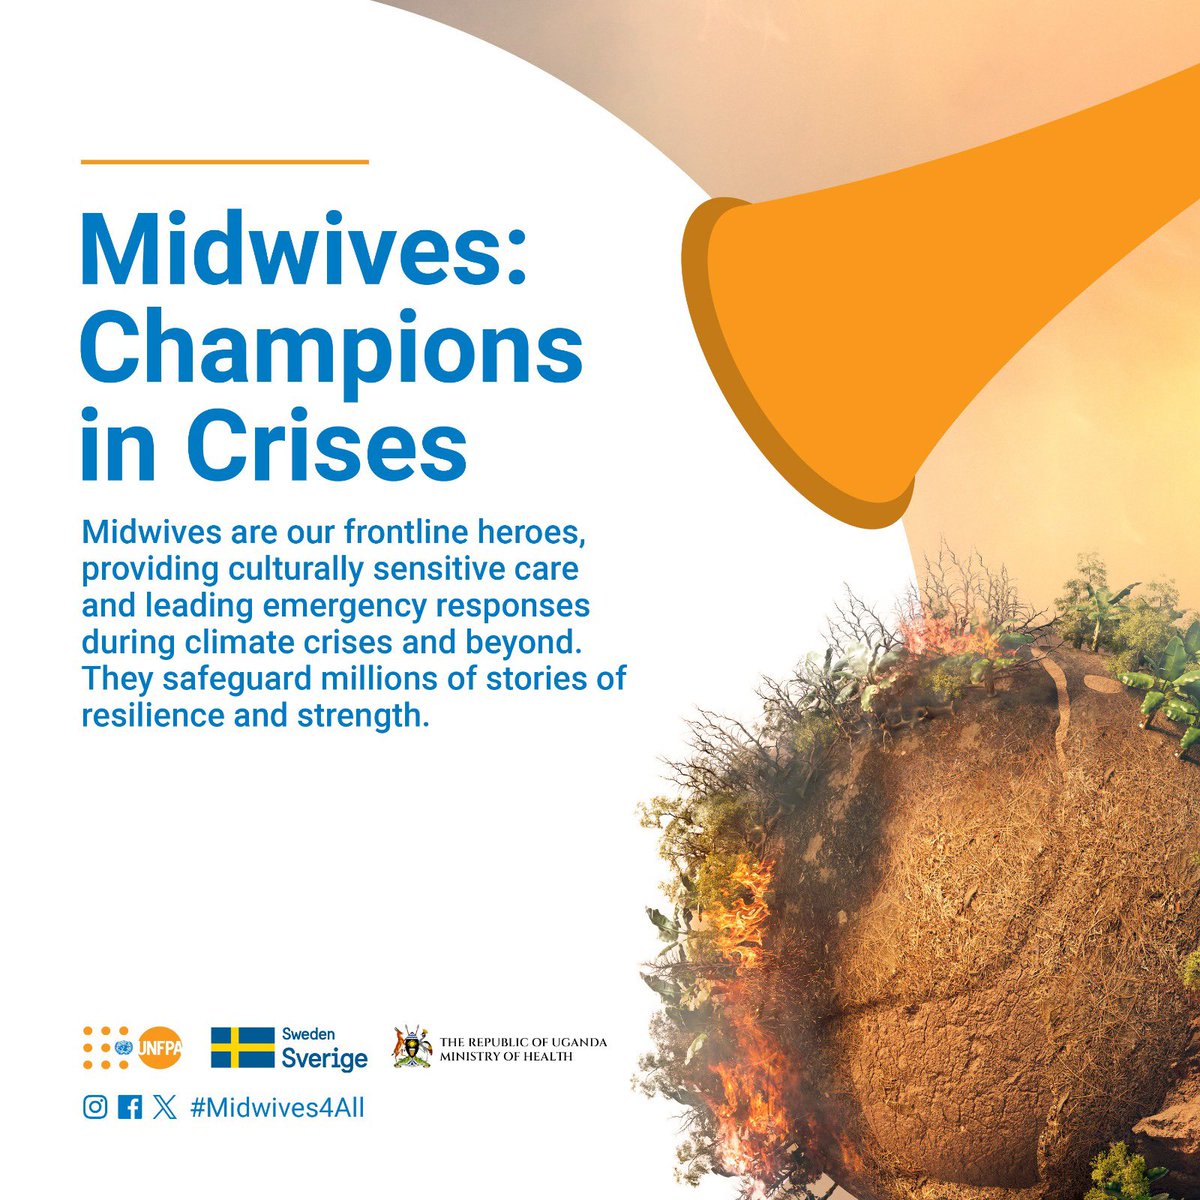 Midwives safeguard millions of stories of resilience and strength. 

#Midwives4All